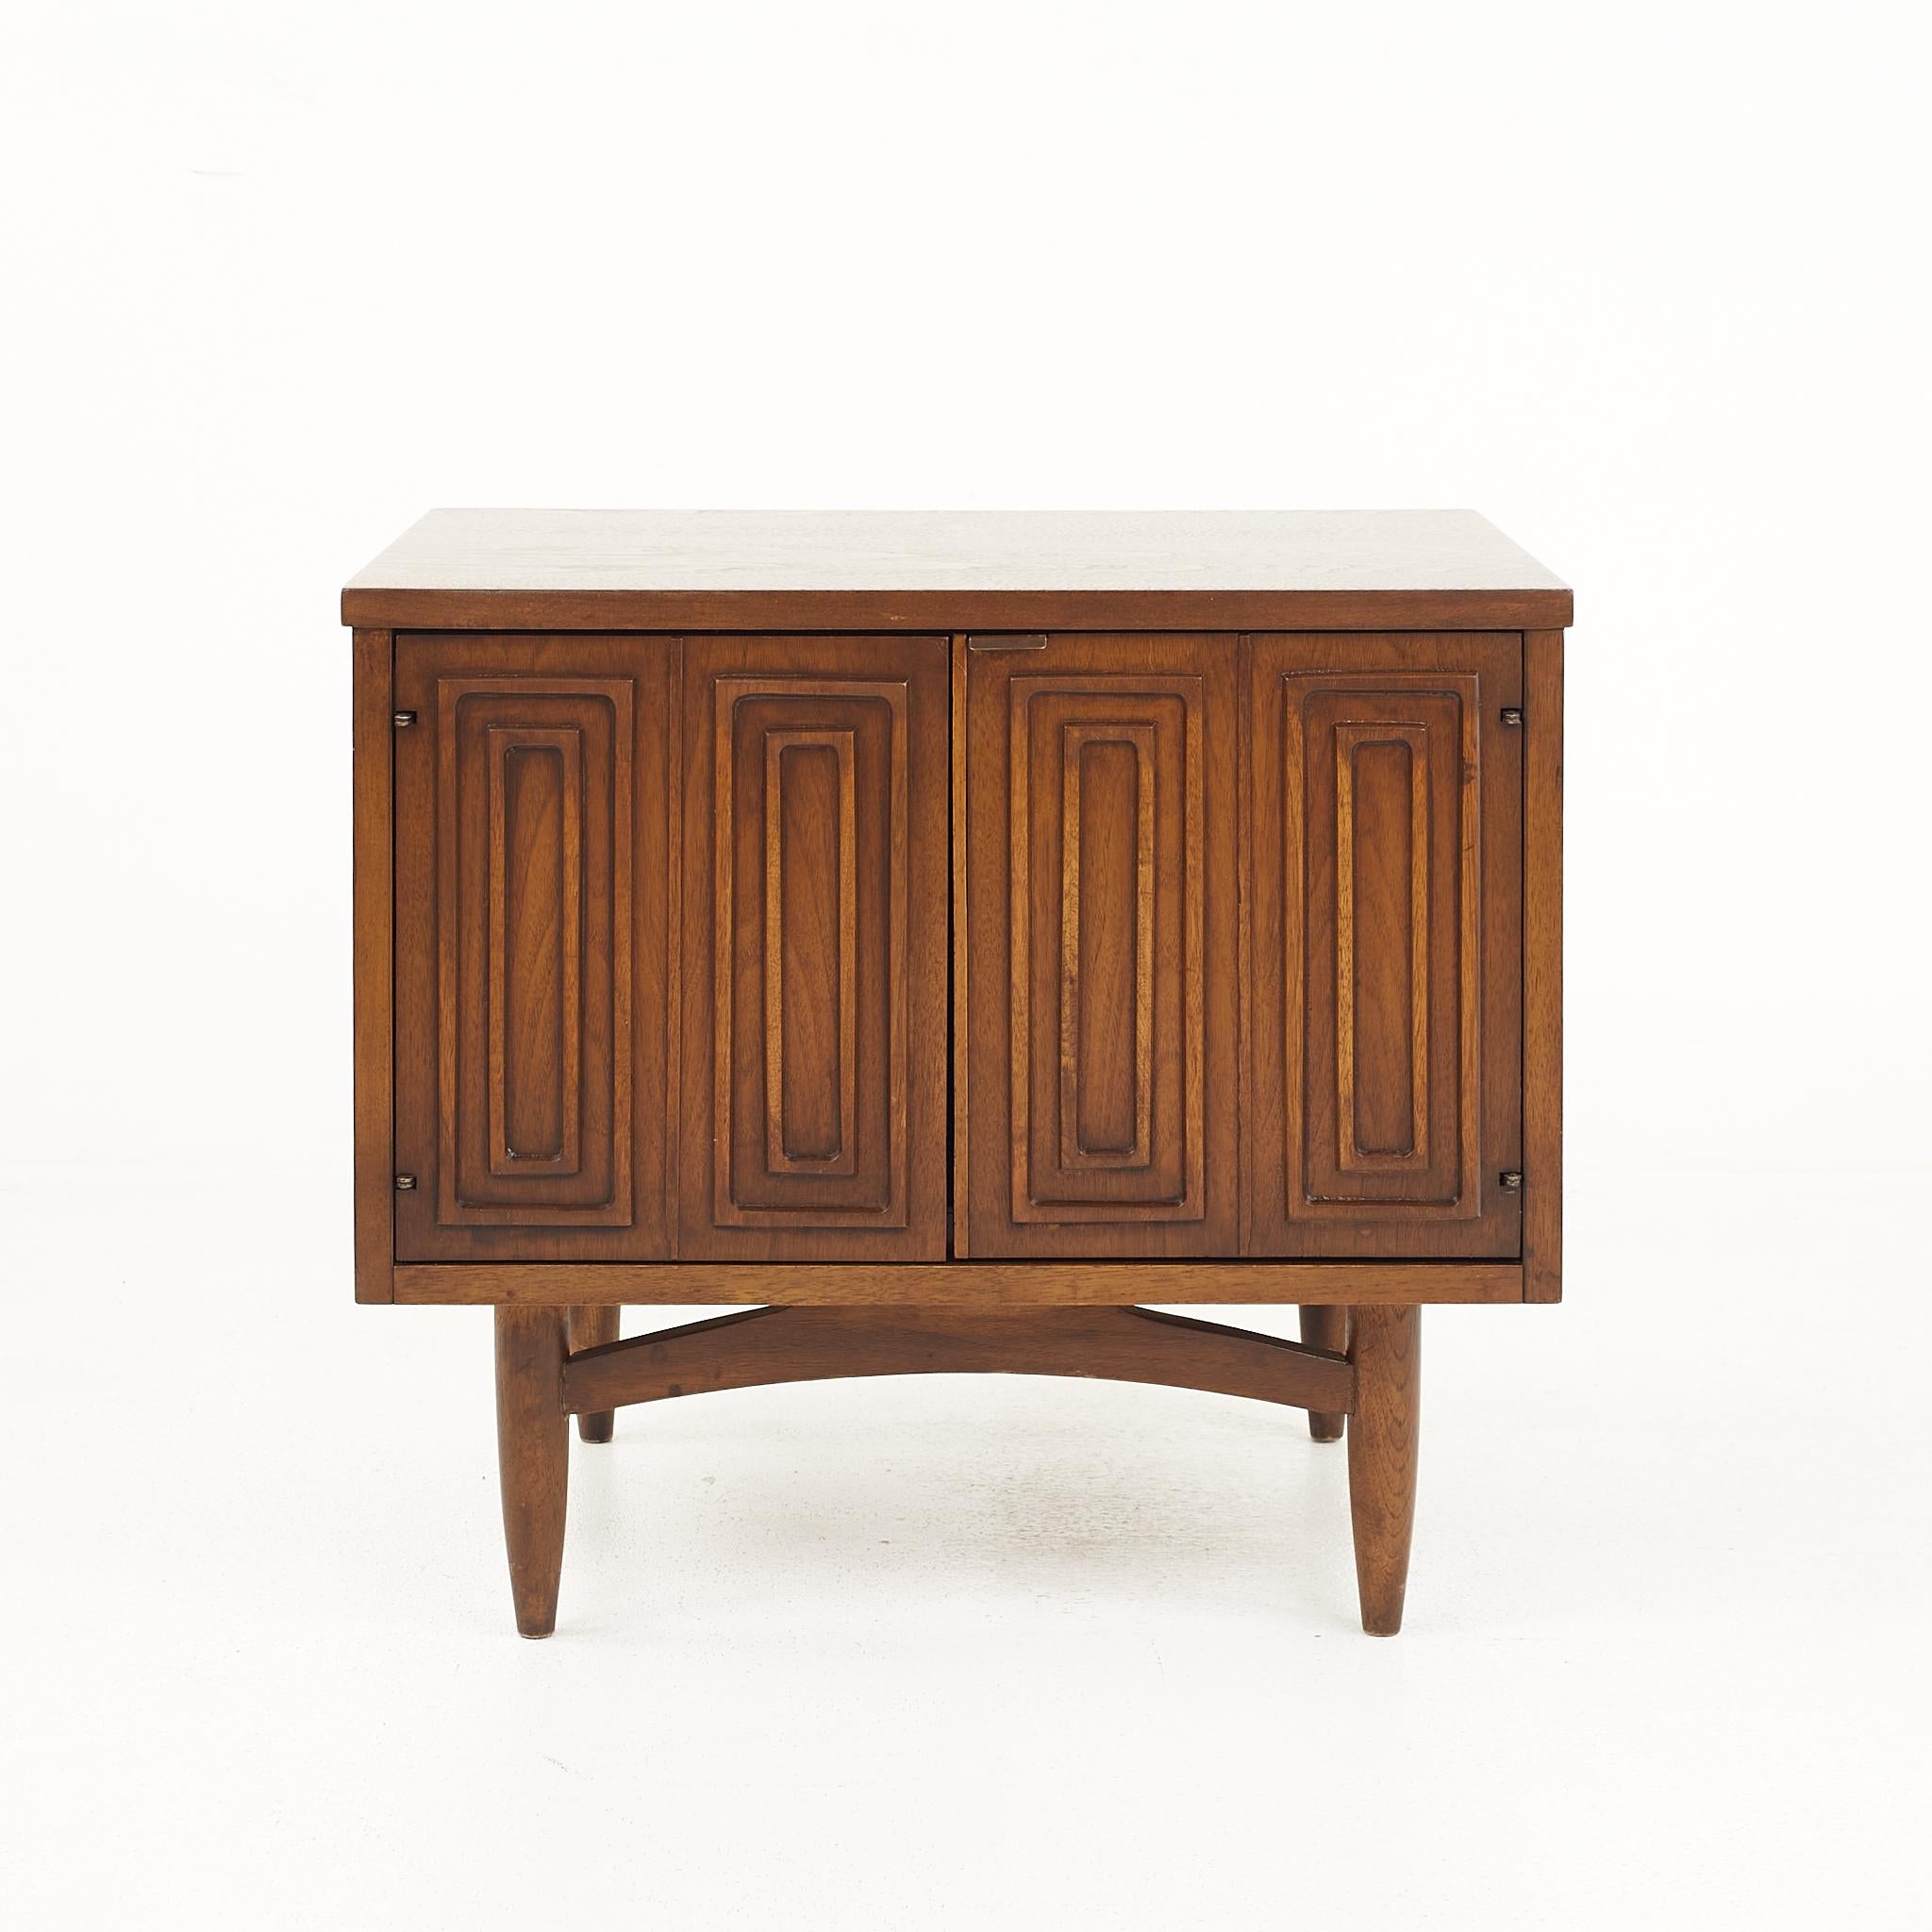 American Broyhill Sculptra Brutalist Mid-Century Walnut Commode Nightstands, a Pair For Sale